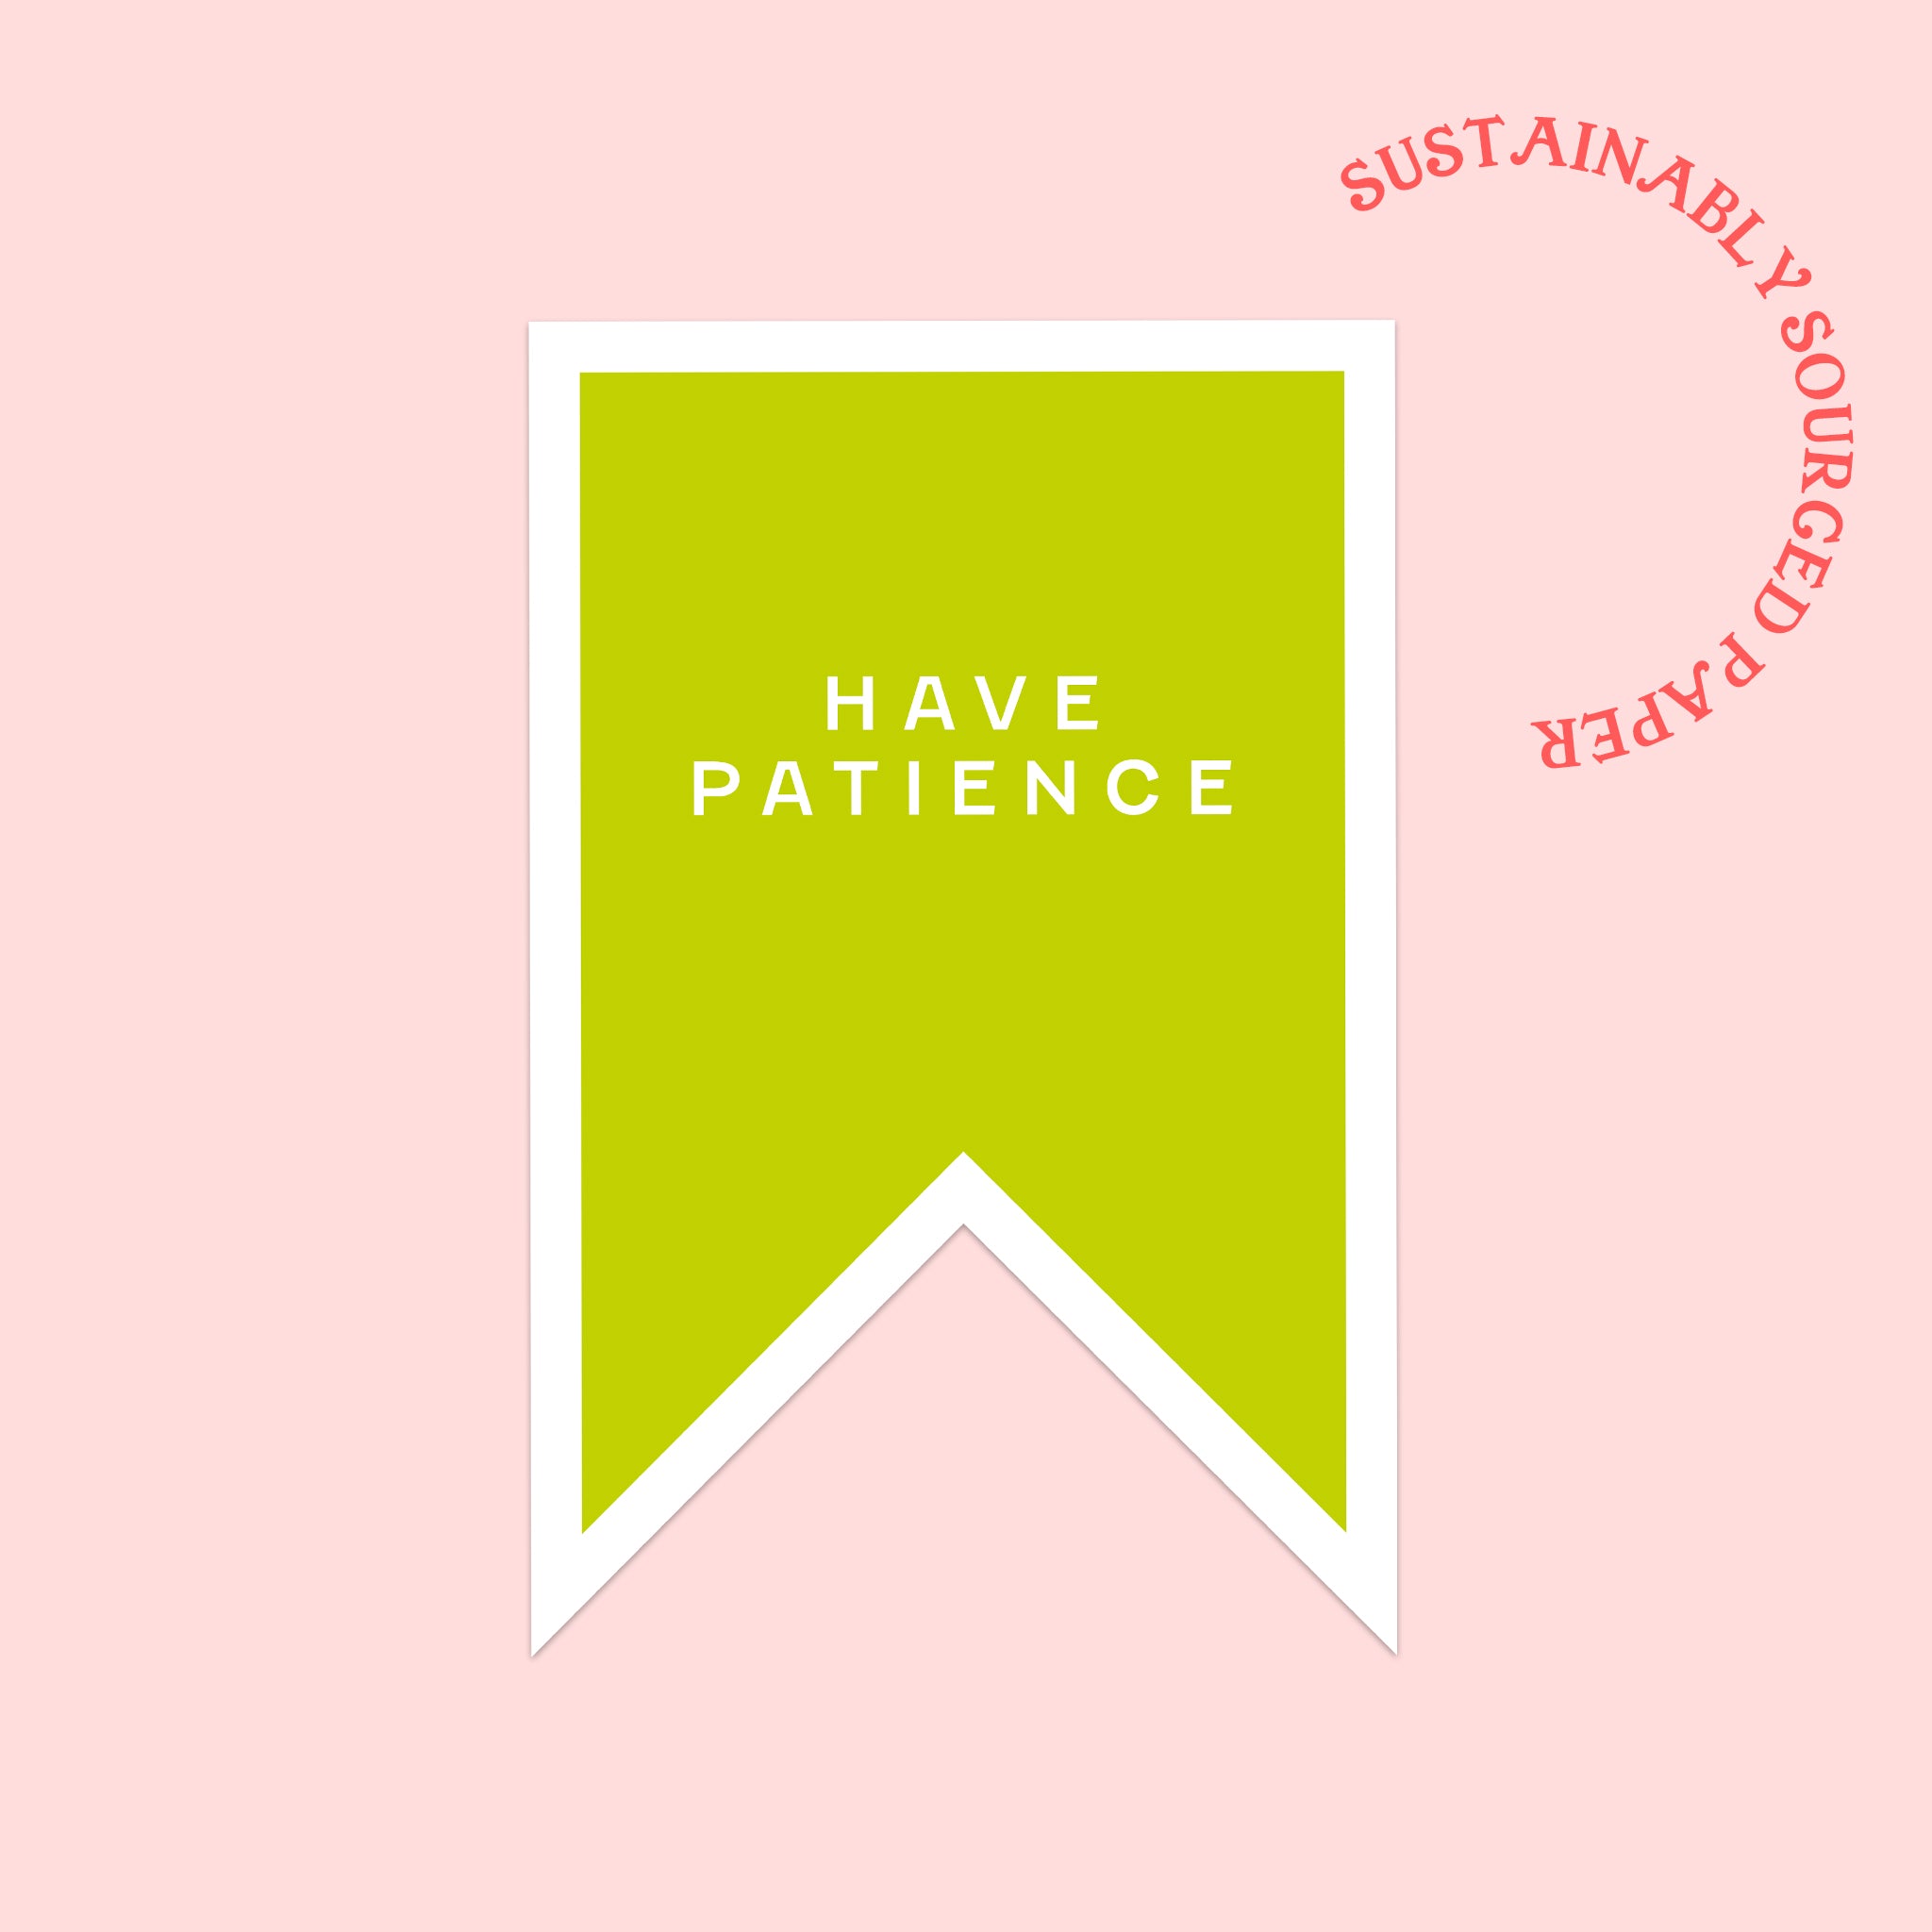 image of a green pennant flag with have patience written in white capitalised text